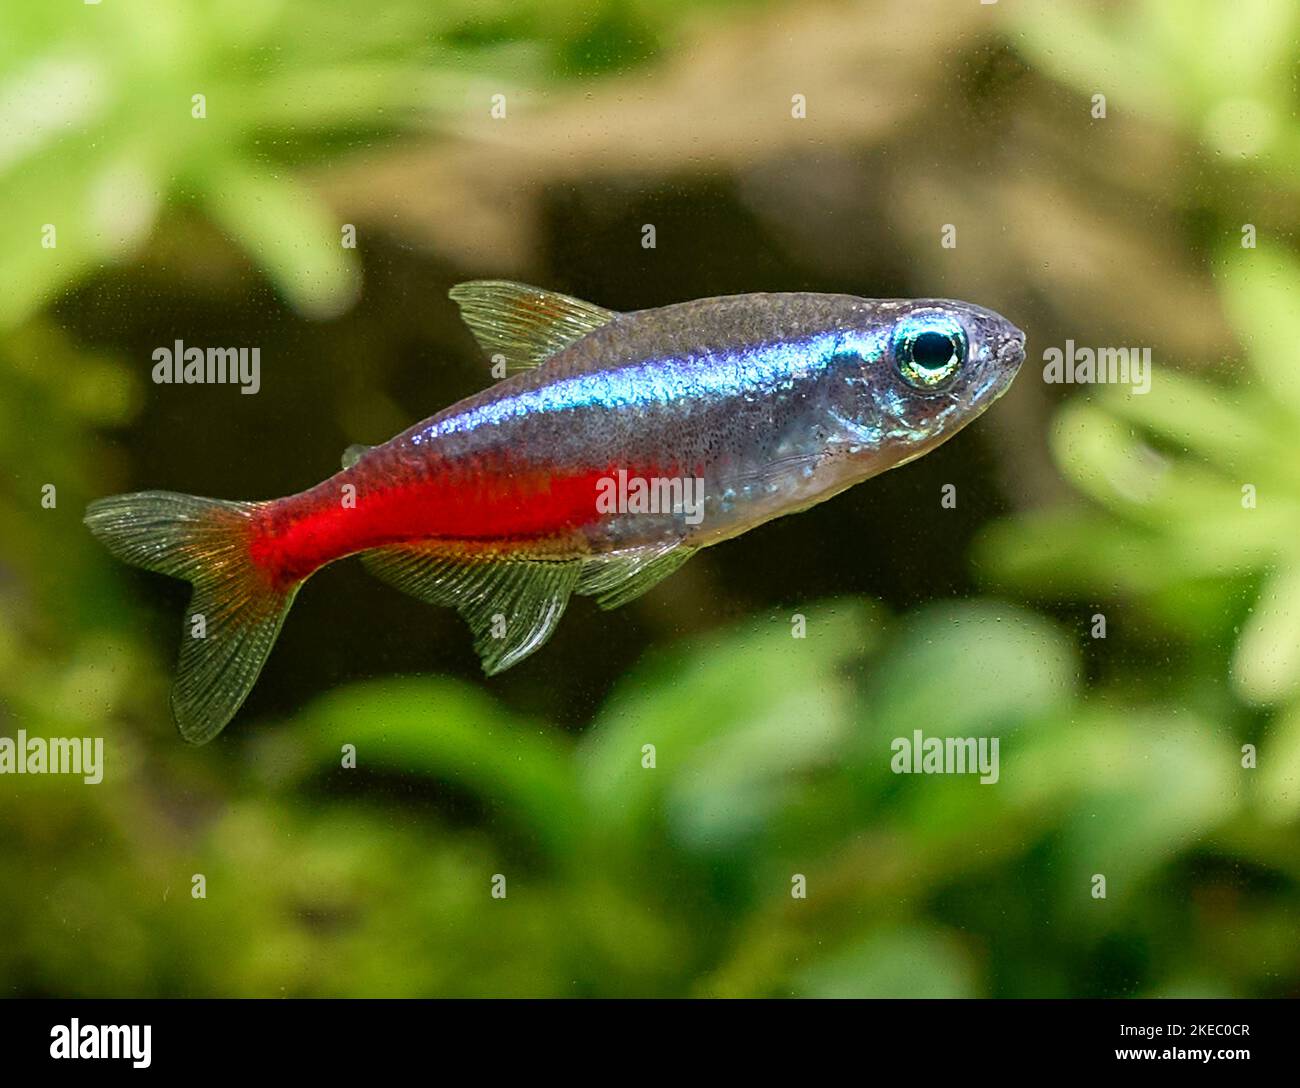 Closeup of blue neon tetra fish isolated on blurred plant background Stock Photo